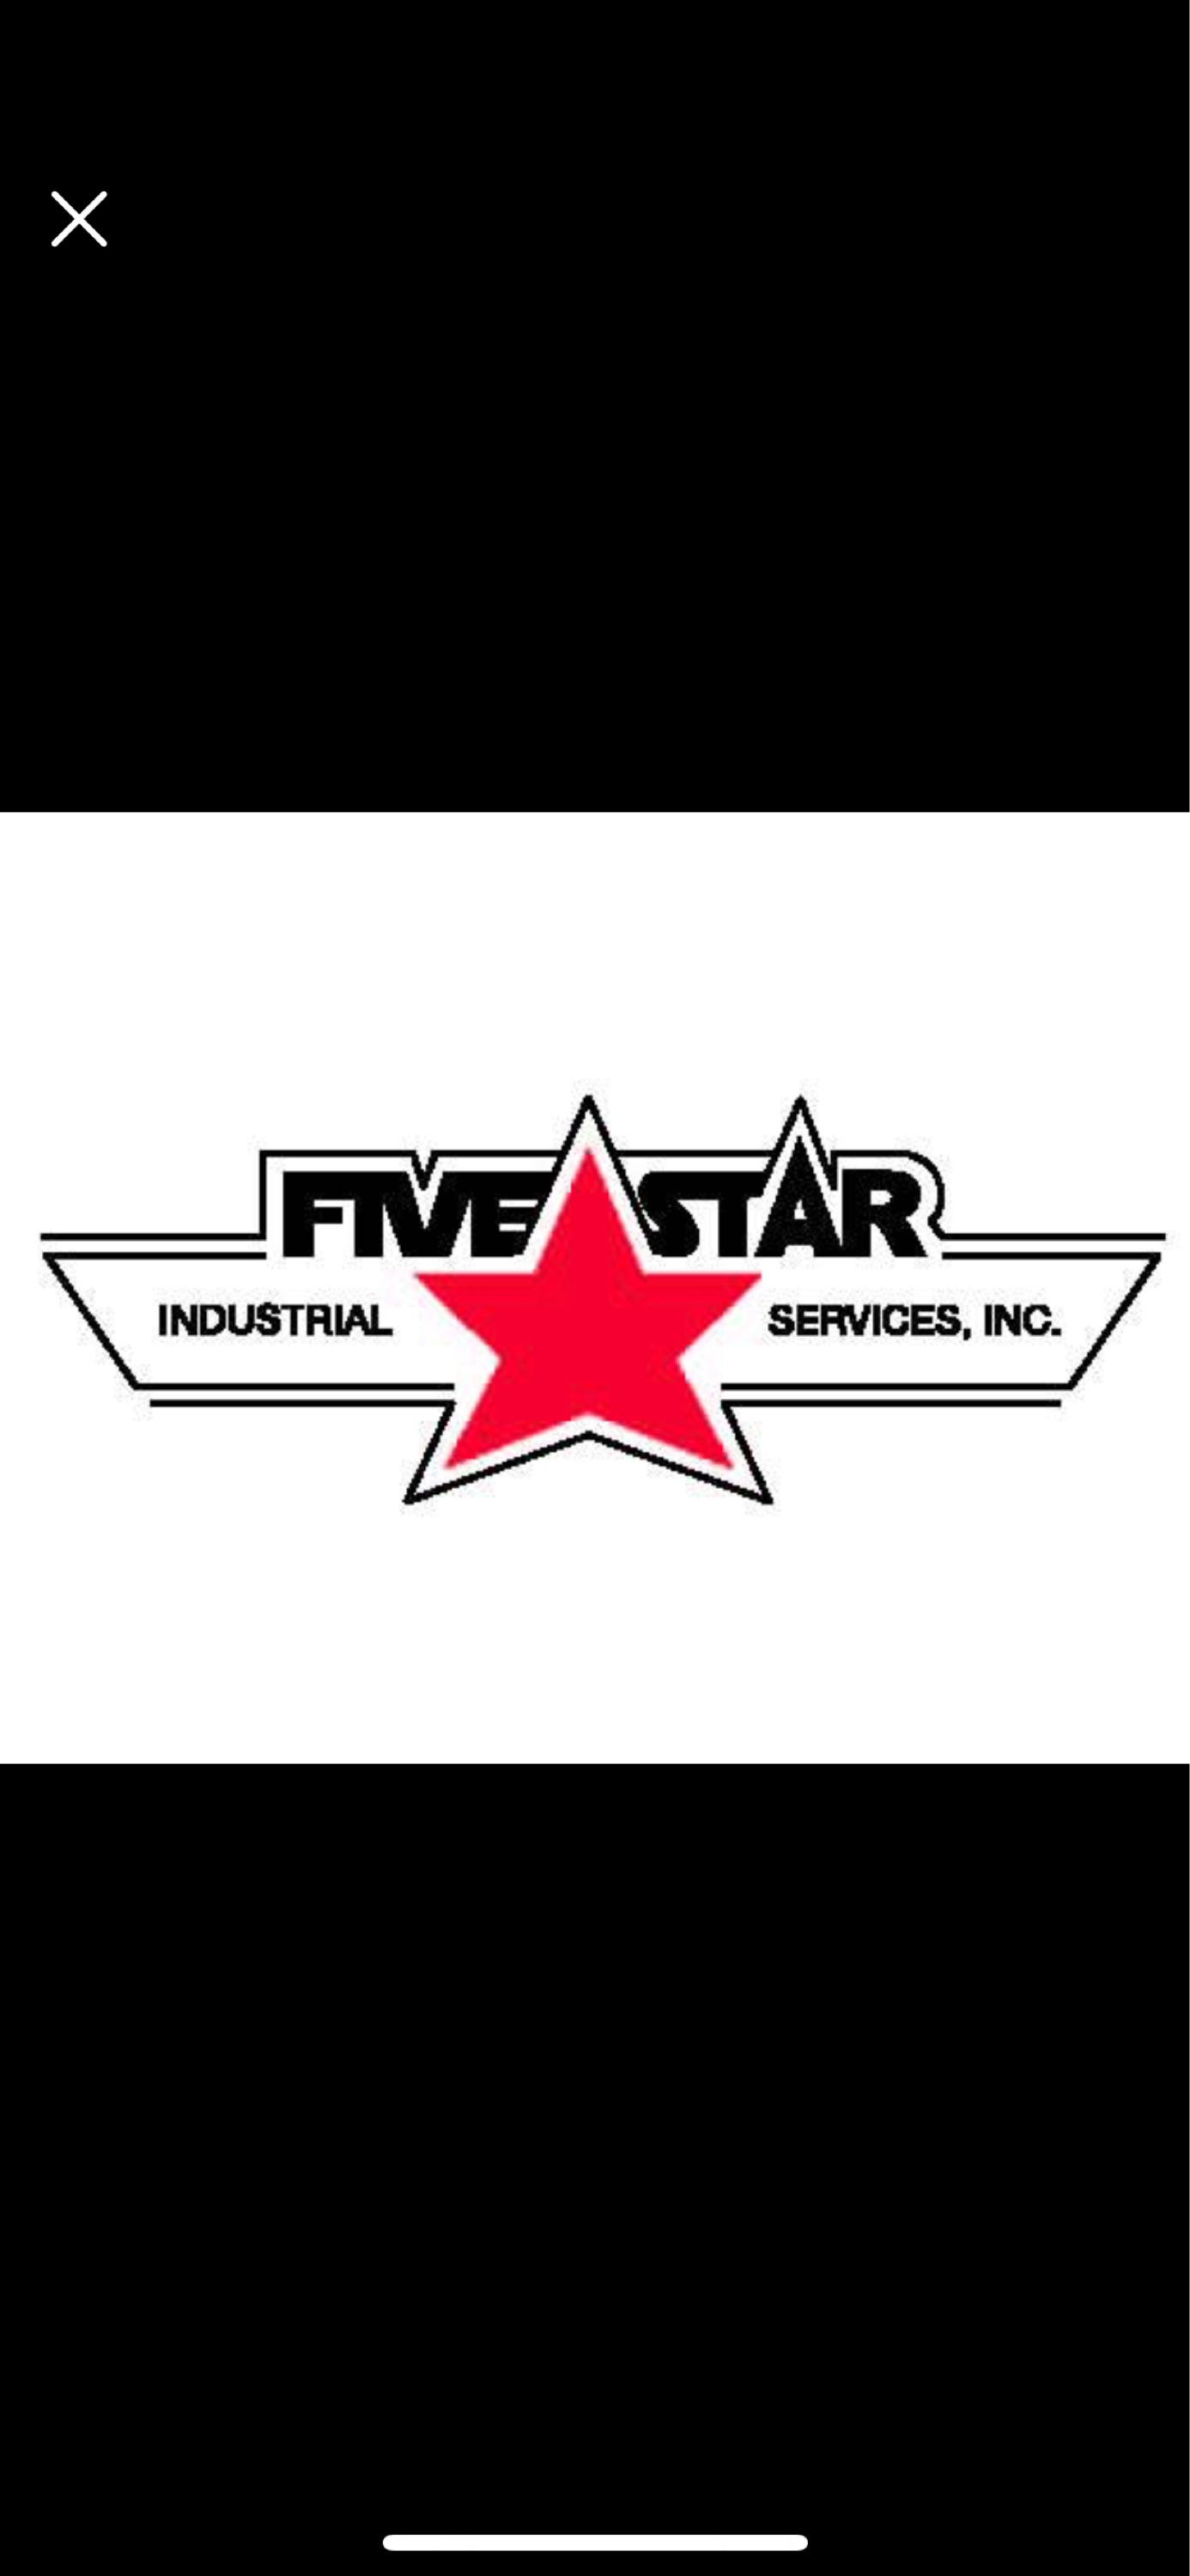 Five Star Industrial Services, Inc. Logo